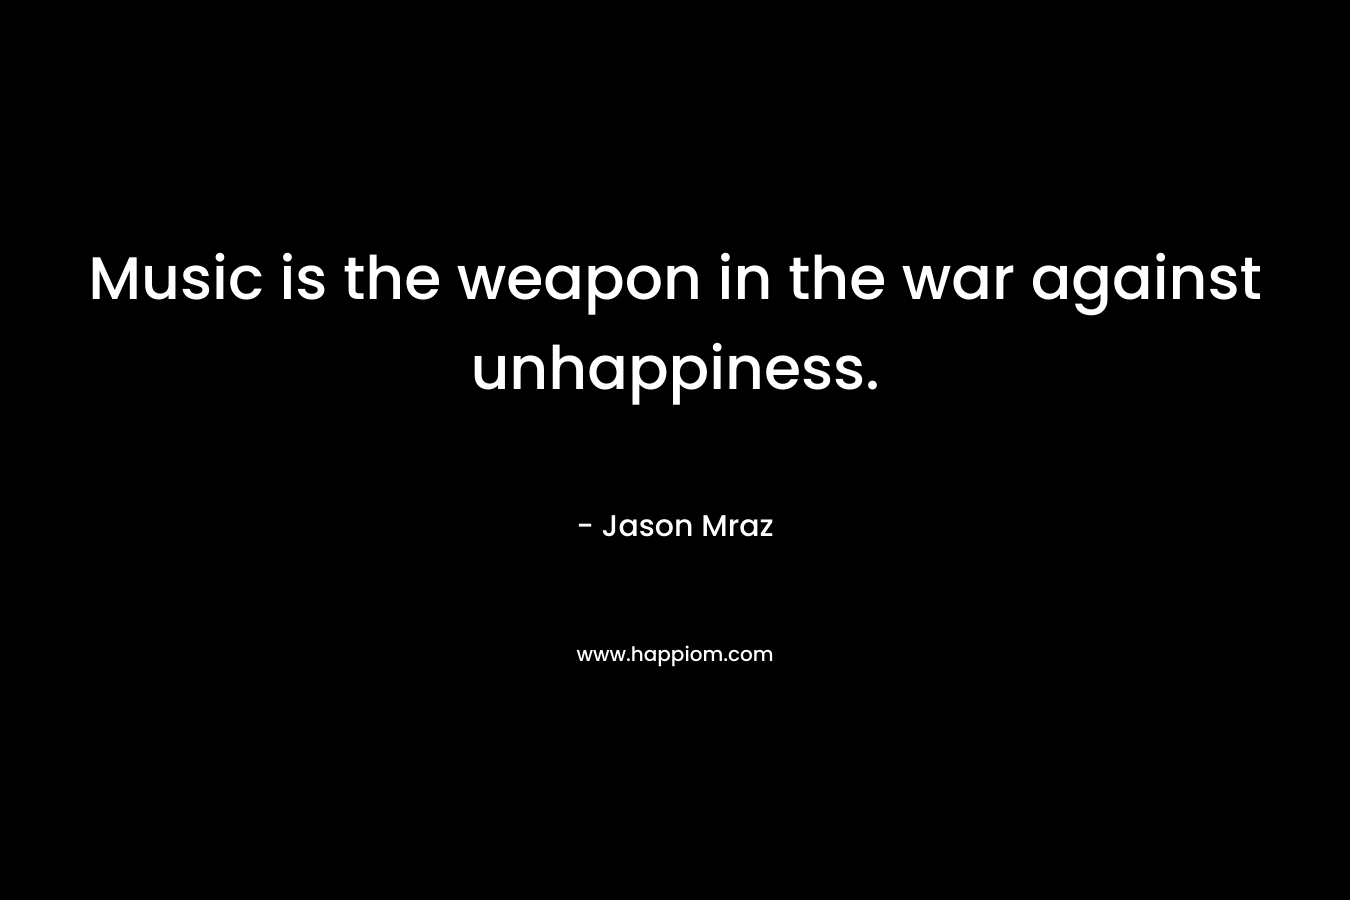 Music is the weapon in the war against unhappiness.